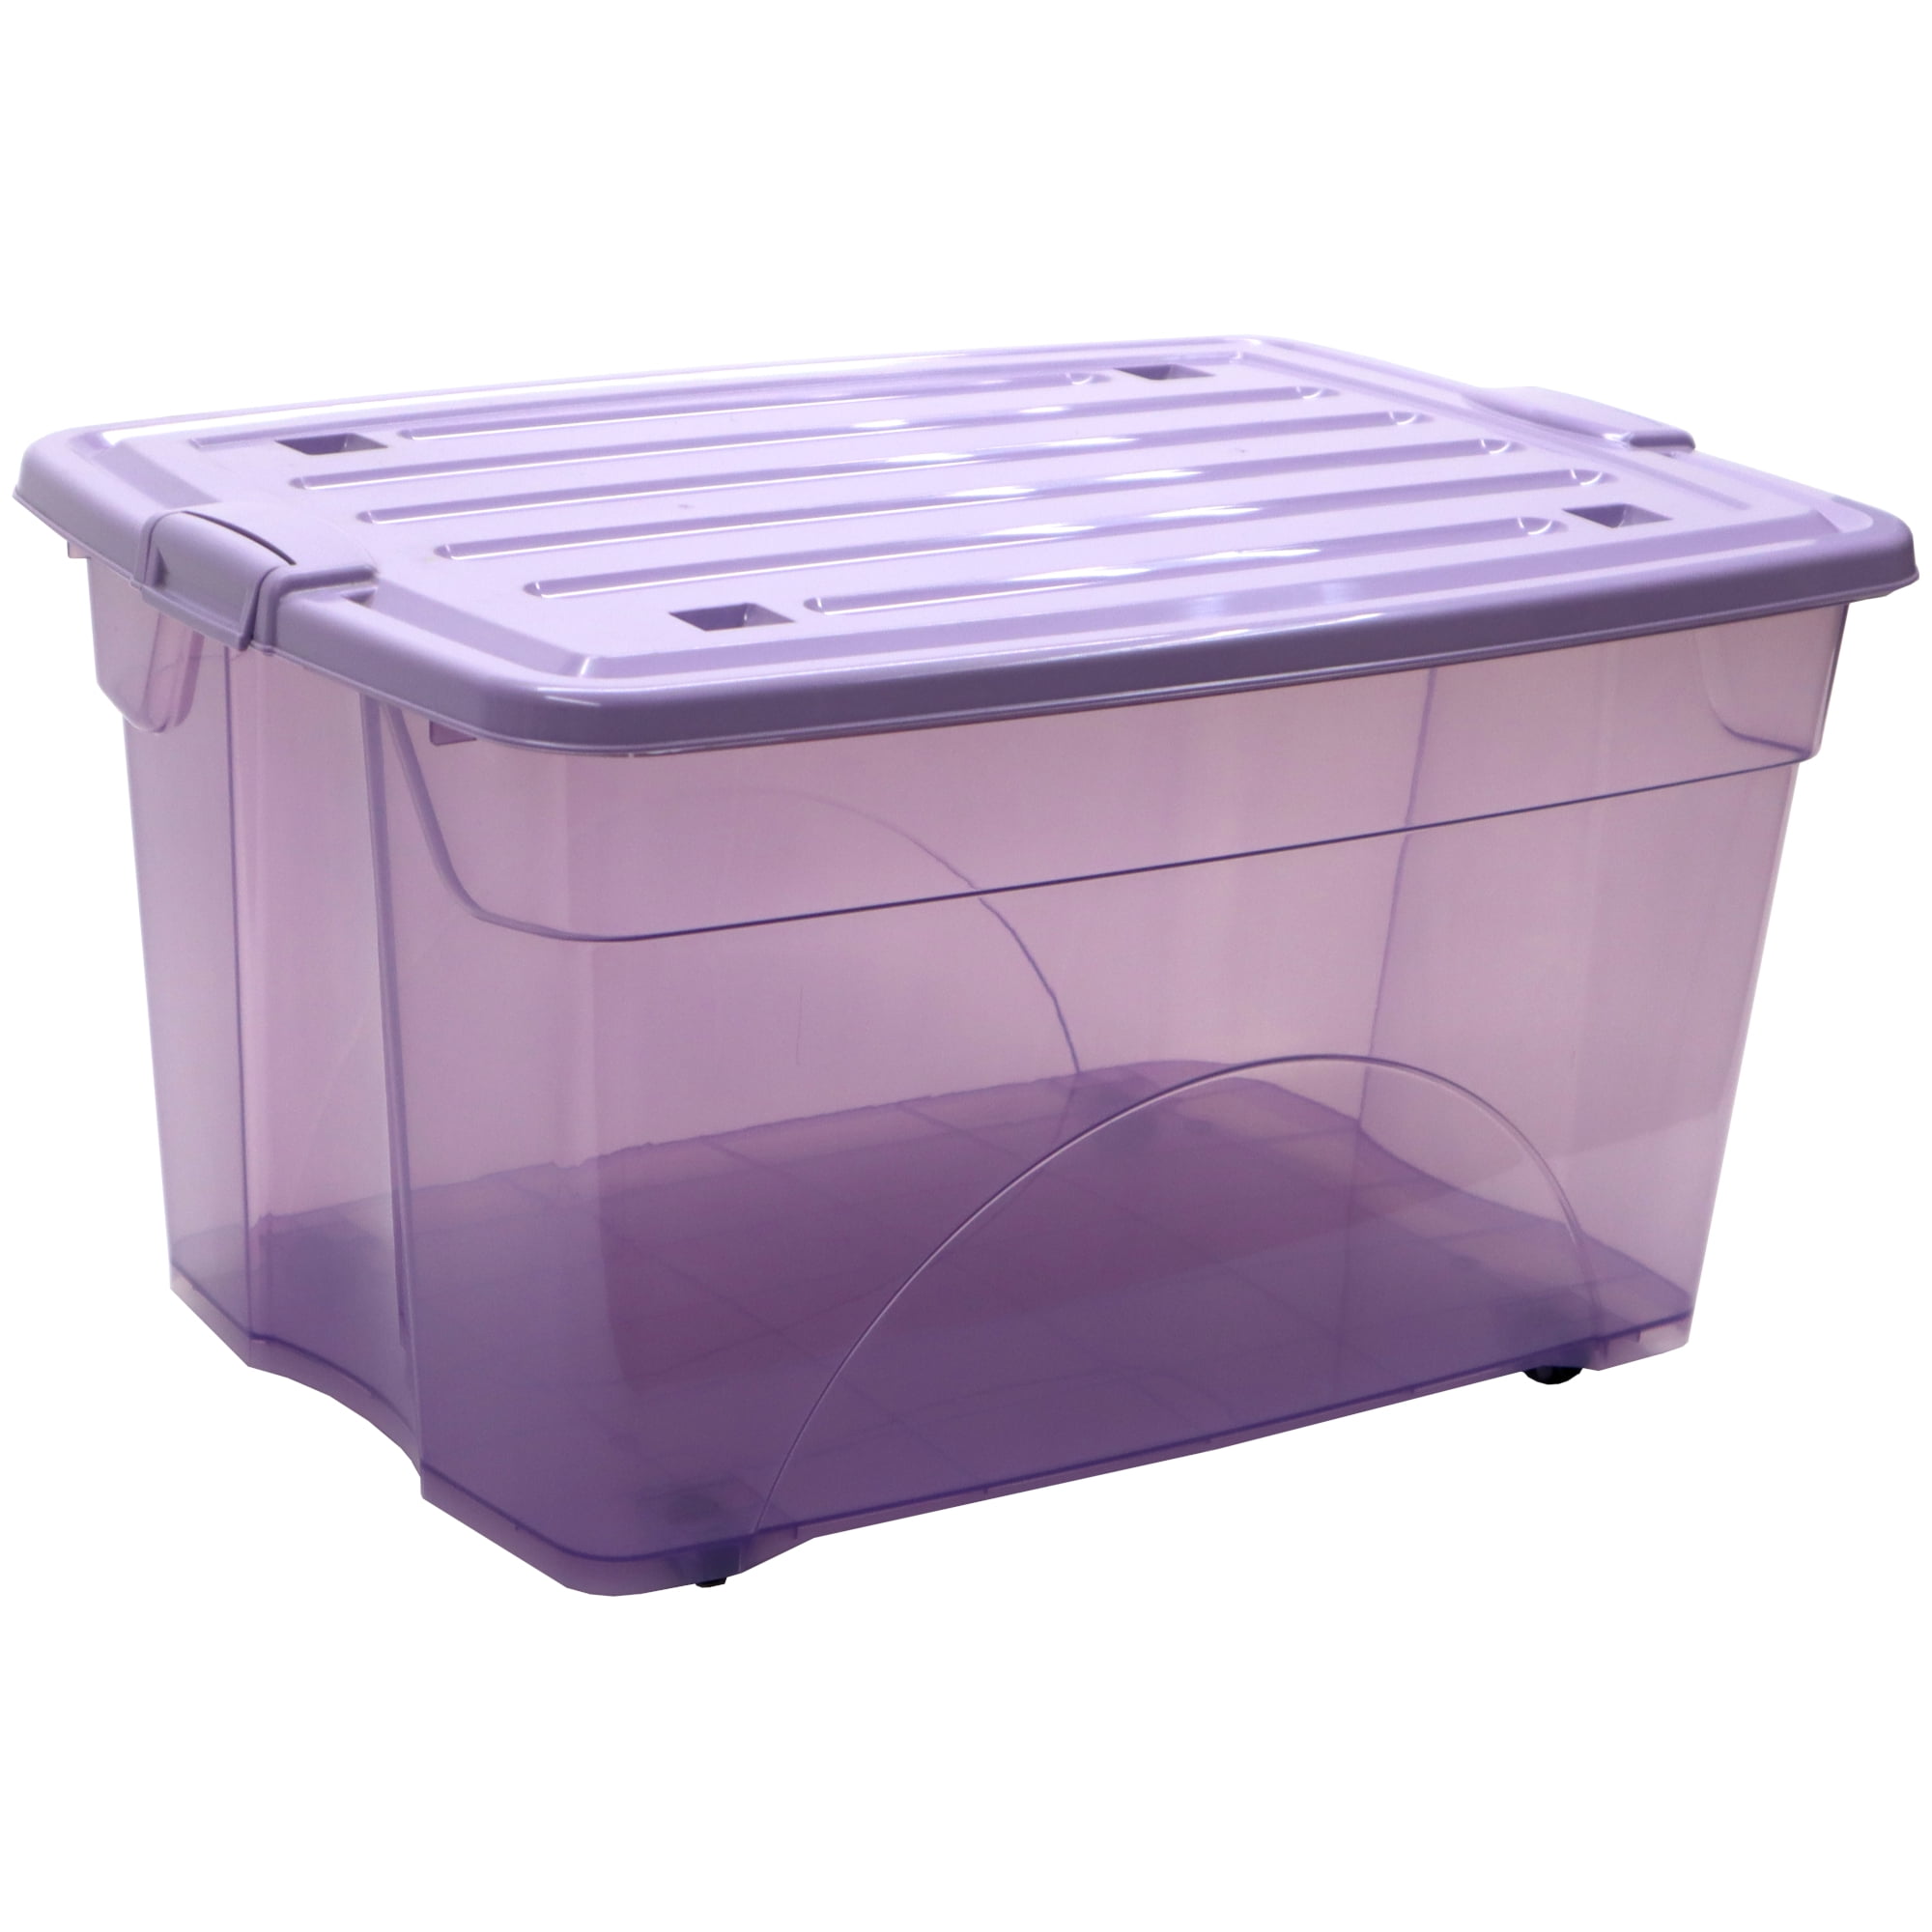 BIN 7 LITRE WITH CLIP ON LID PURPLE STORAGE-WASTE-RECYCLING-KITCHEN-BEDROOM 